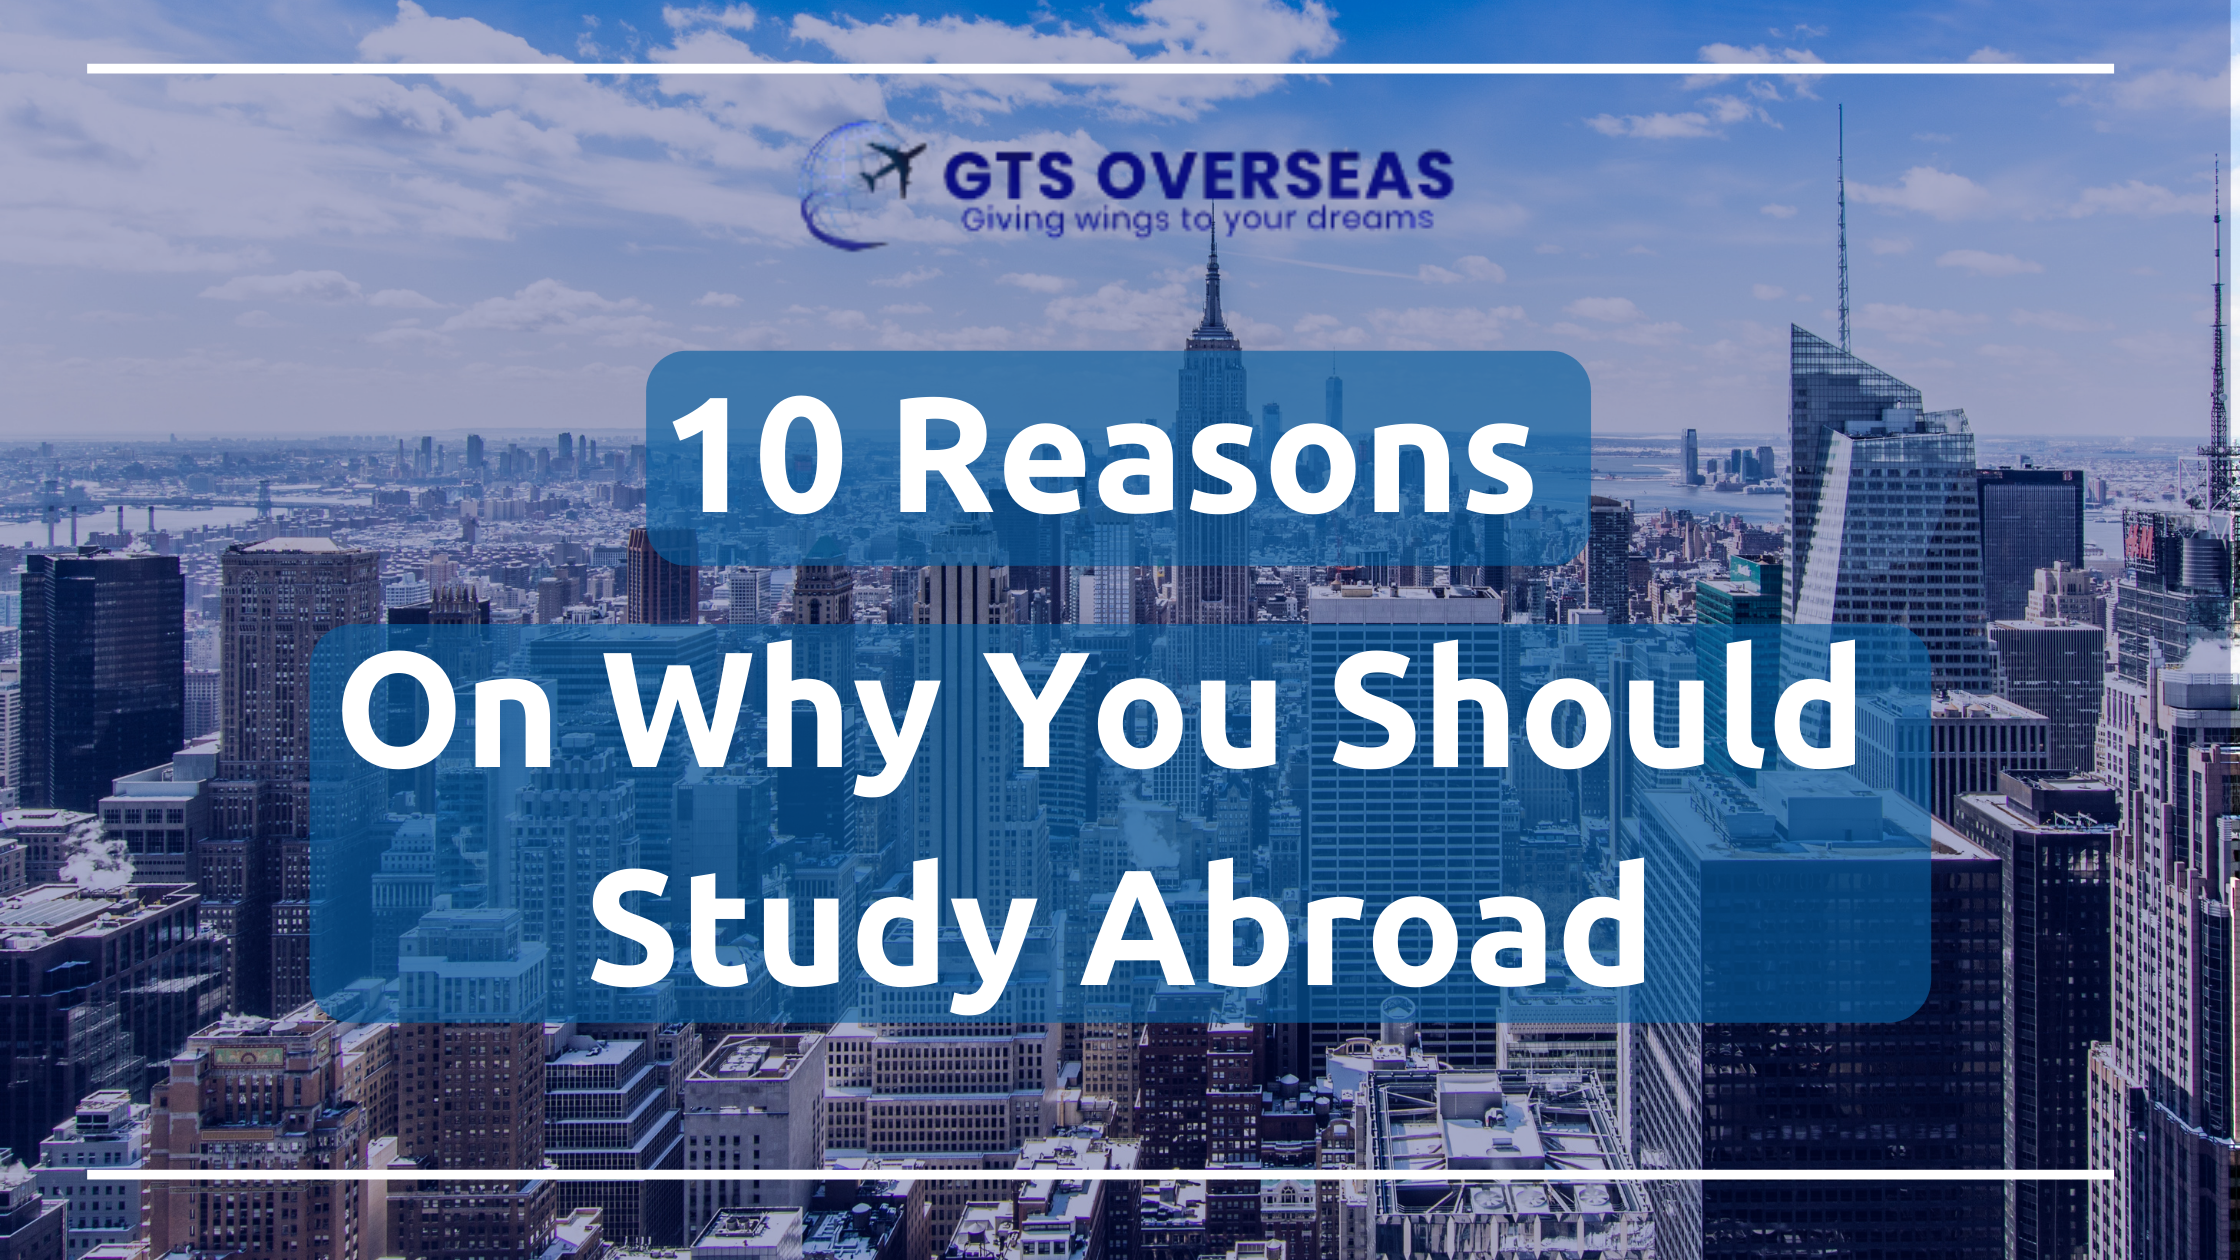 10 Reasons on why you should Study Abroad | Study Abroad Guide 2021 | GTS Overseas